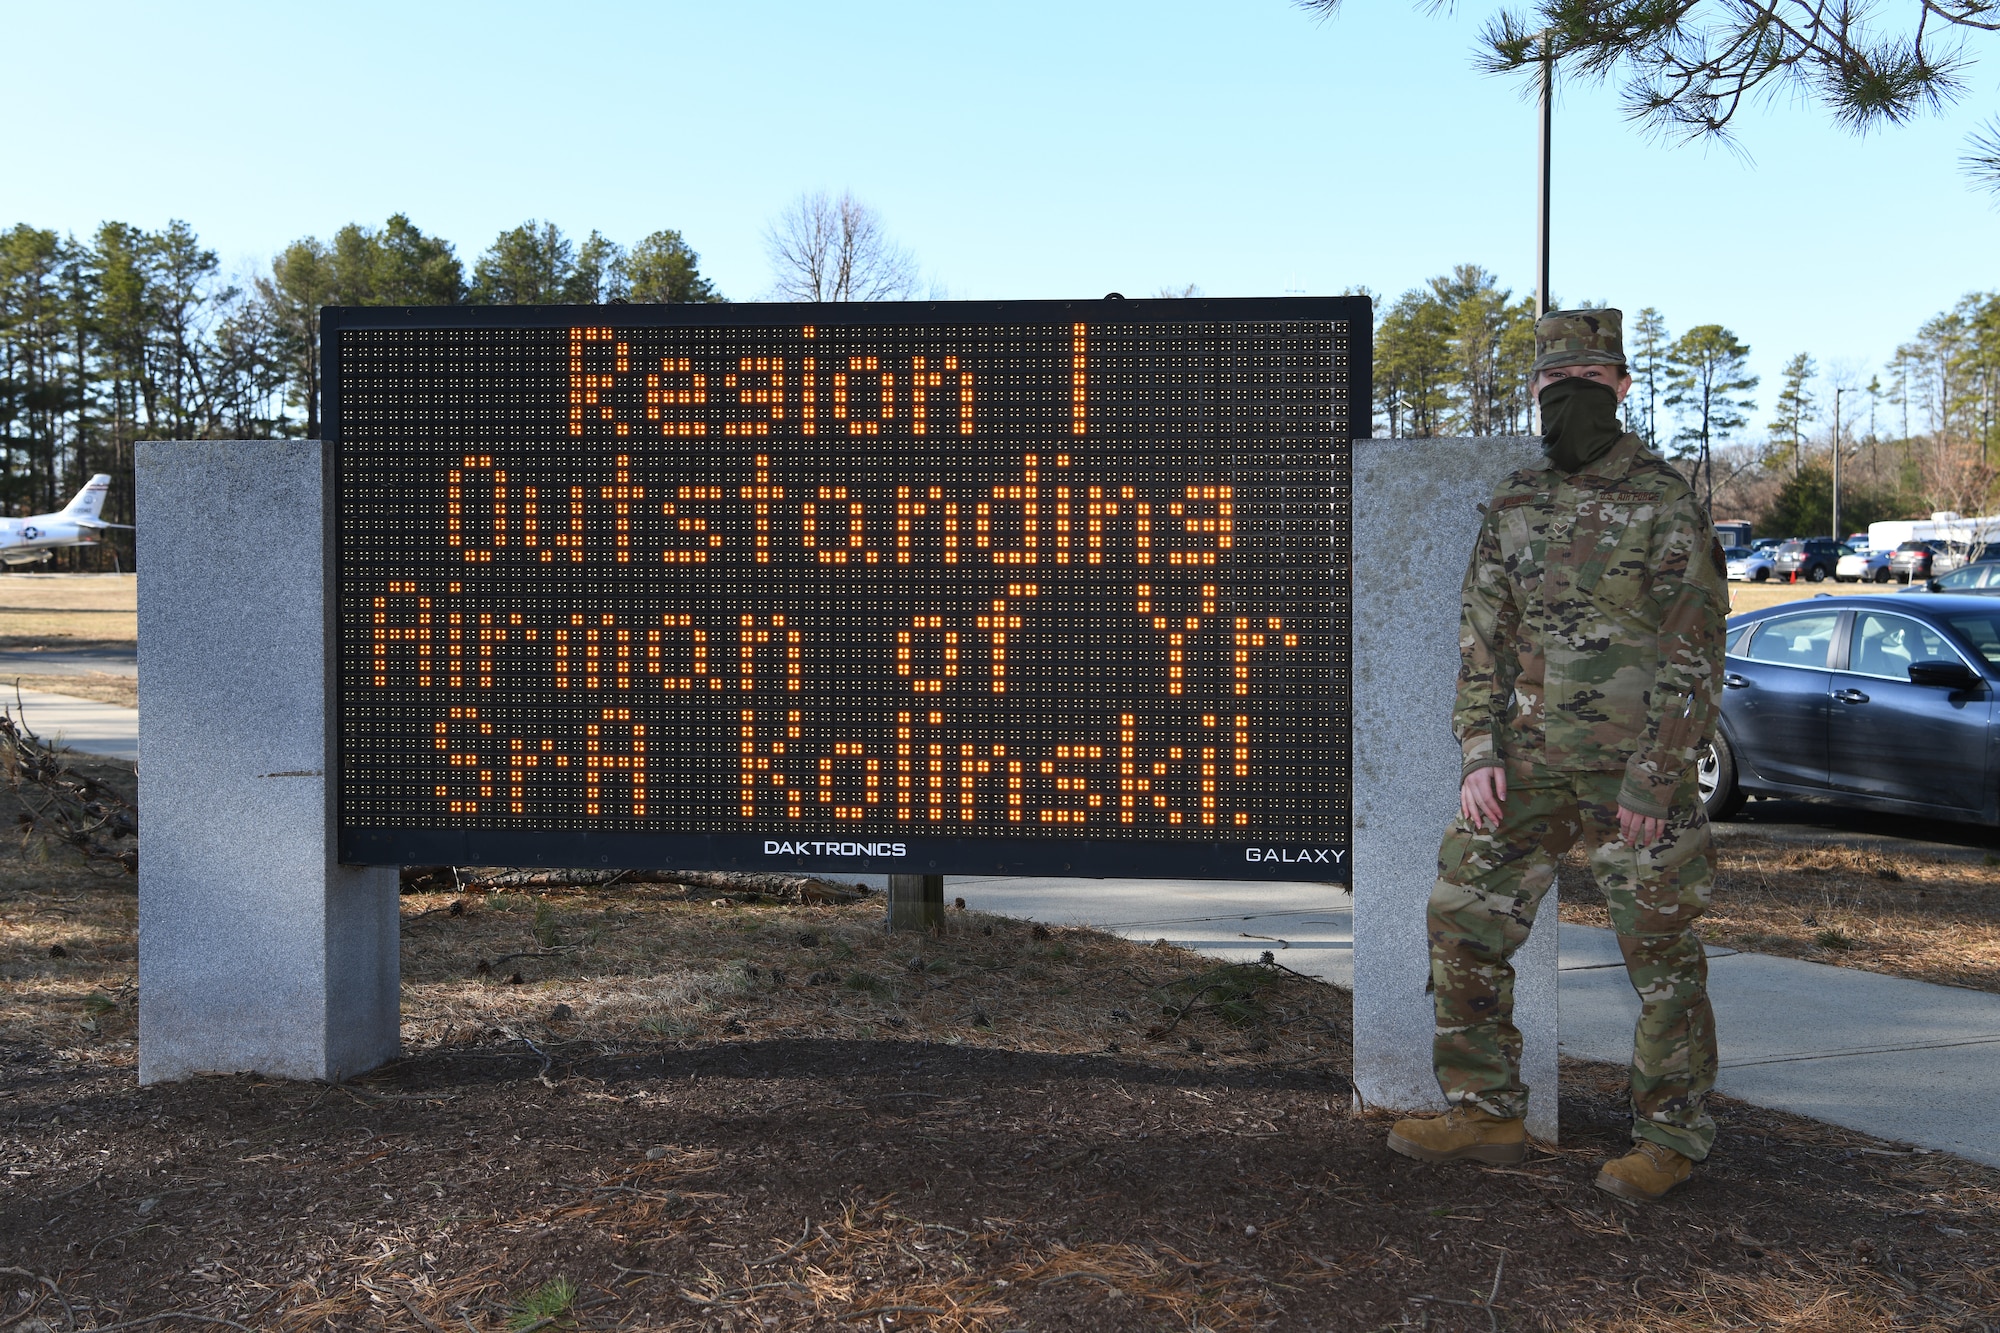 Senior Airman Sara Kolinski, 104th Fighter Wing public affairs specialist, poses for a photo next to a sign on Barnes Air National Guard Base, Massachusetts, Mar. 13, 2021. Kolinski was named the Air National Guard Region One Outstanding Airman of the Year for 2020. (U.S. Air National Guard photo by Staff Sgt. Hanna Smith)